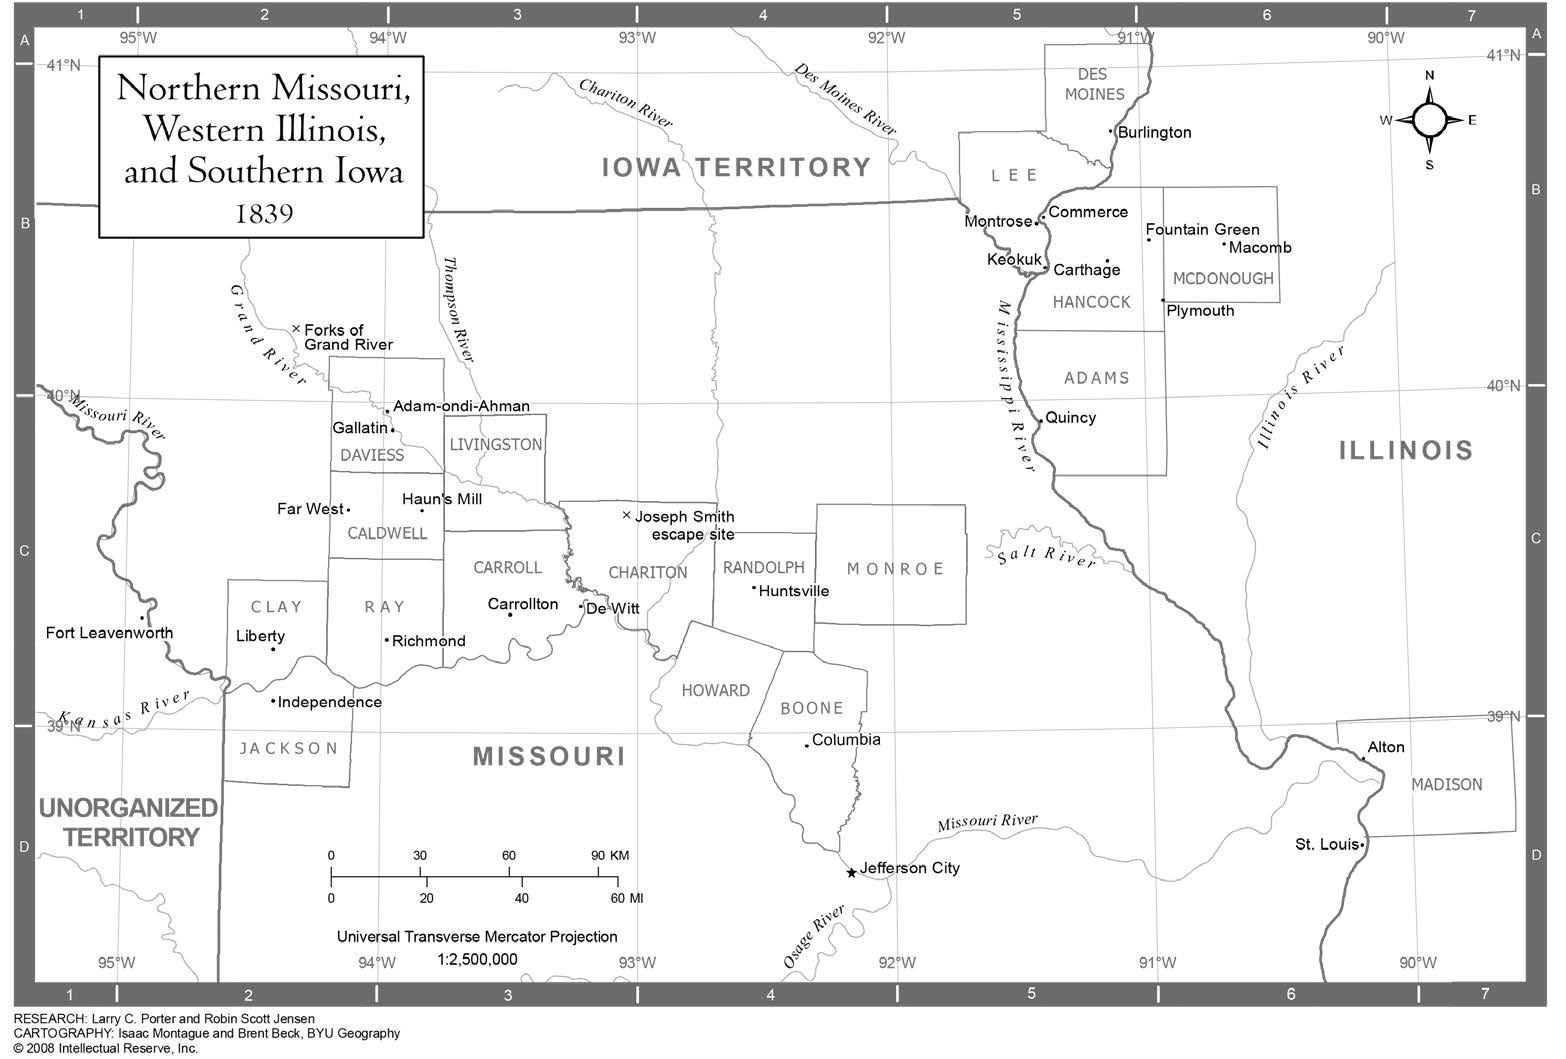 Northern Missouri, Western Illinois, and Southern Iowa, 1839. Courtesy of the Joseph Smith Papers Project.